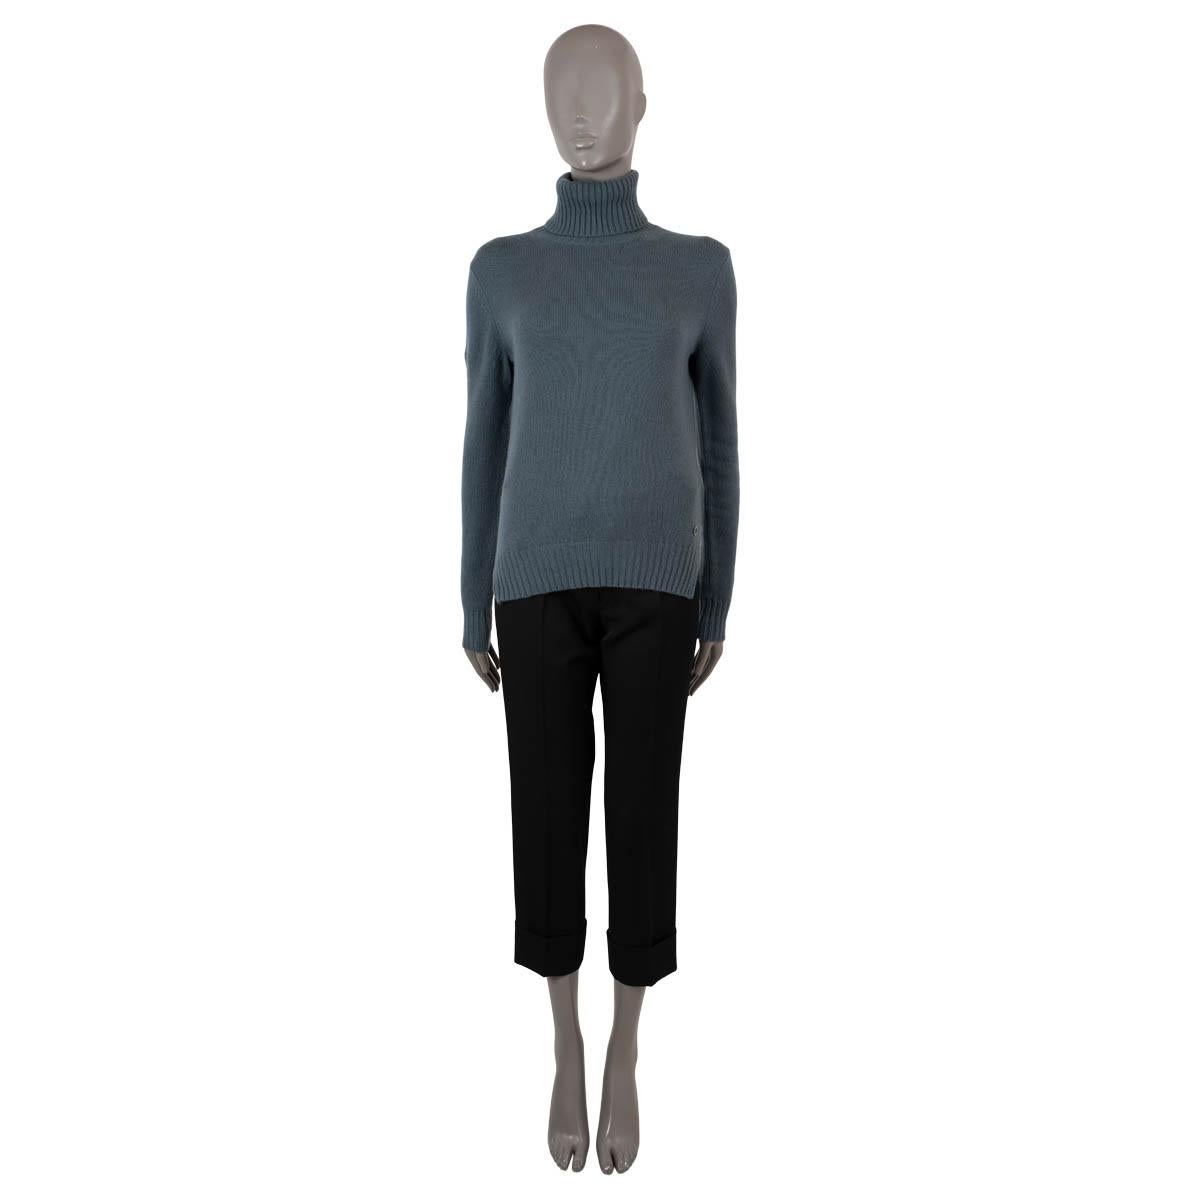 100% authentic Loro Piana Parksville turtleneck knit sweater in petrol cashmere (100%). Features long sleeves, a ribbed hemline and ribbed cuffs. Unlined. Has been worn and is in excellent condition.

Measurements
Model	FAG3537
Tag